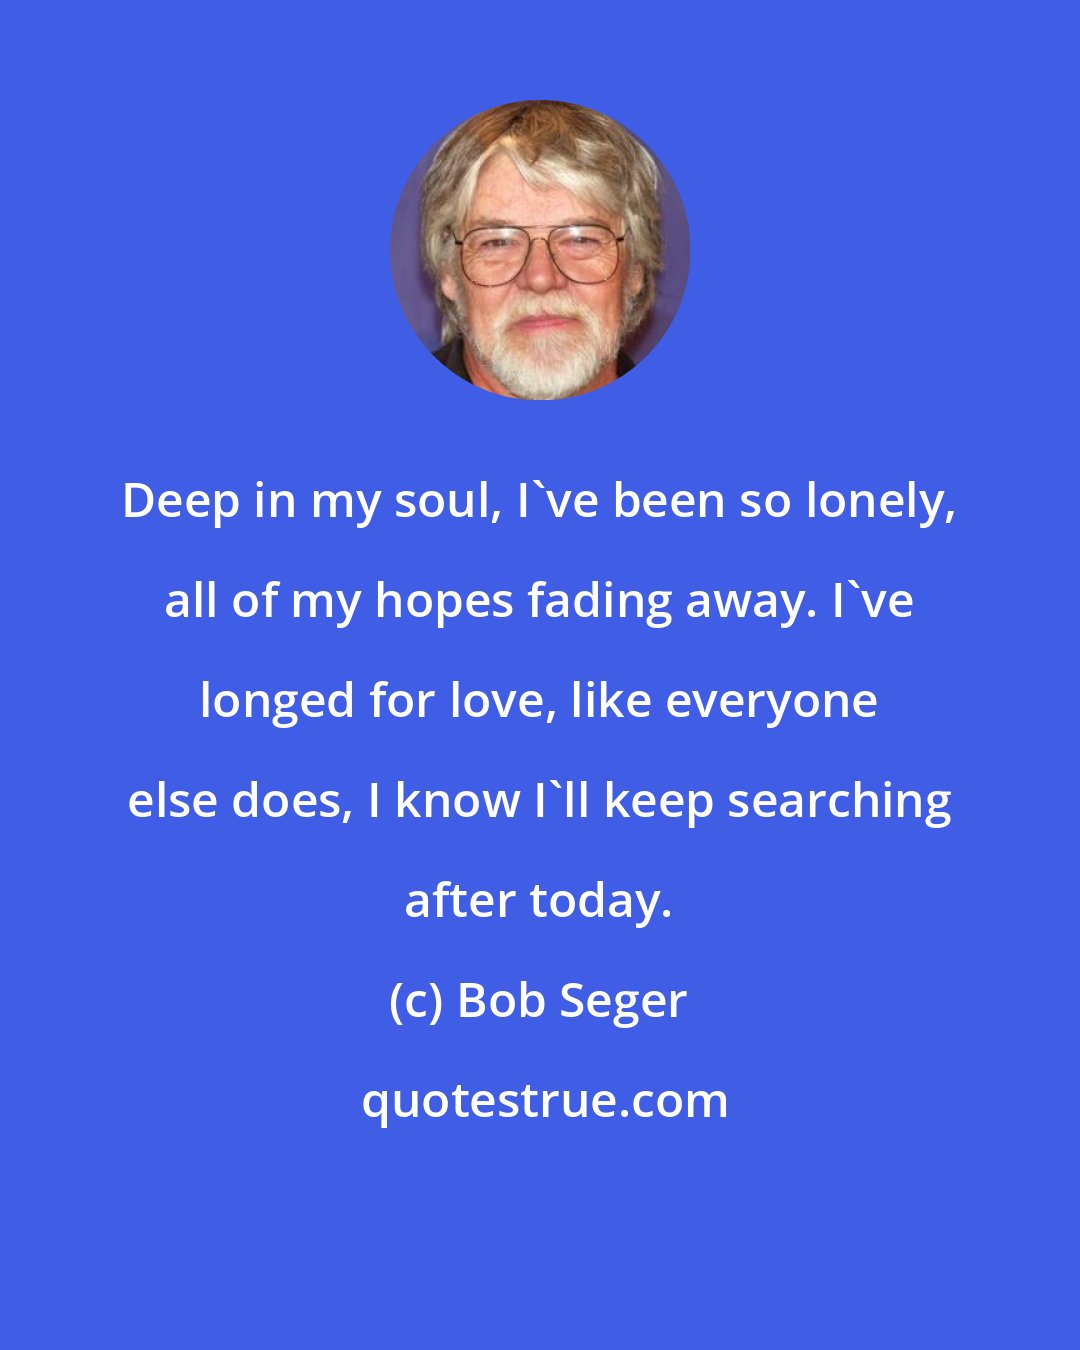 Bob Seger: Deep in my soul, I've been so lonely, all of my hopes fading away. I've longed for love, like everyone else does, I know I'll keep searching after today.